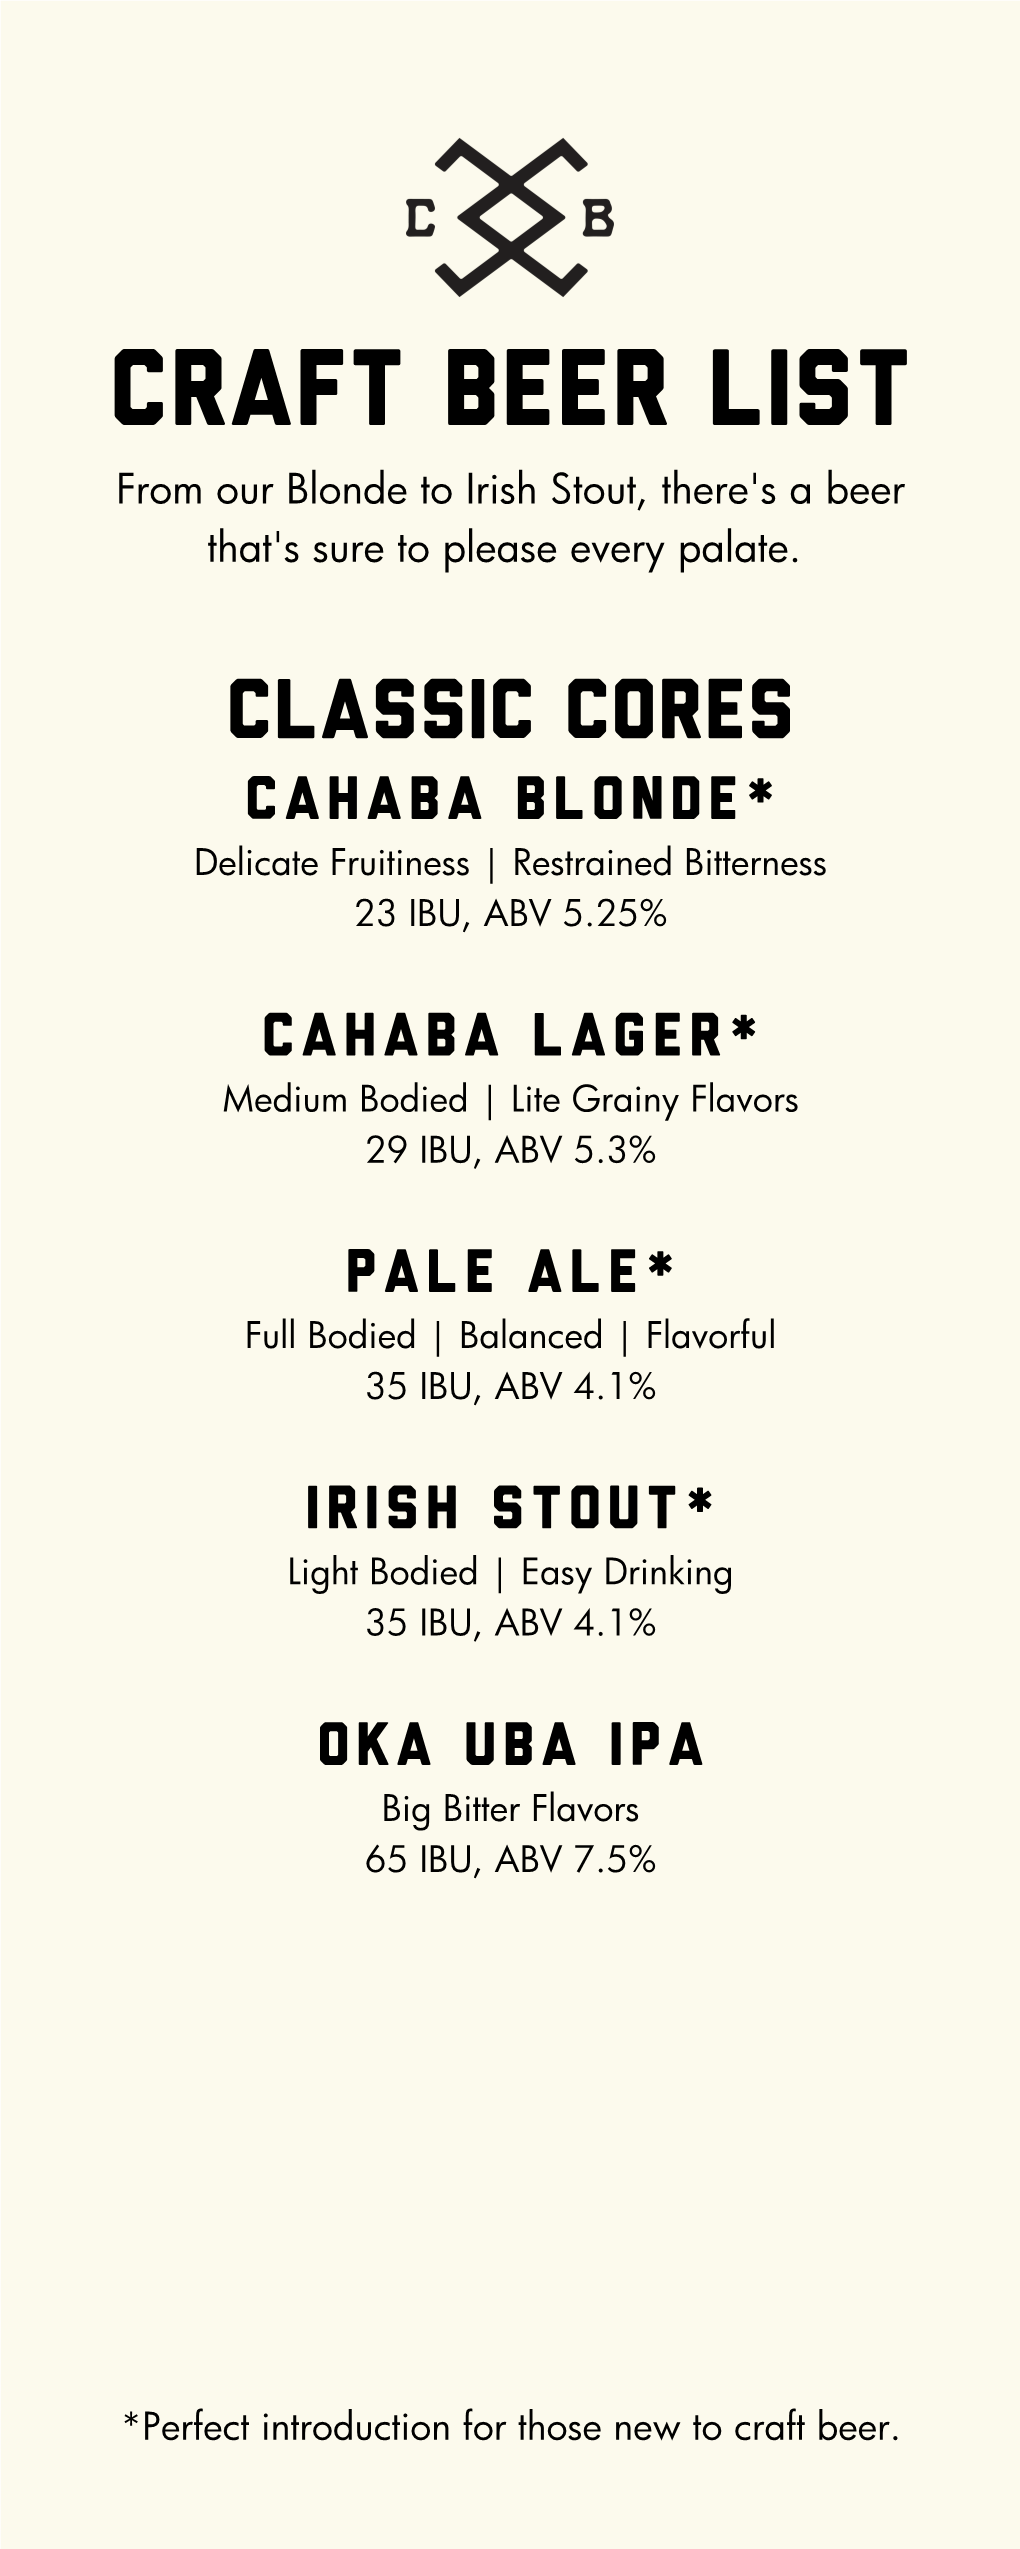 CRAFT BEER LIST from Our Blonde to Irish Stout, There's a Beer That's Sure to Please Every Palate